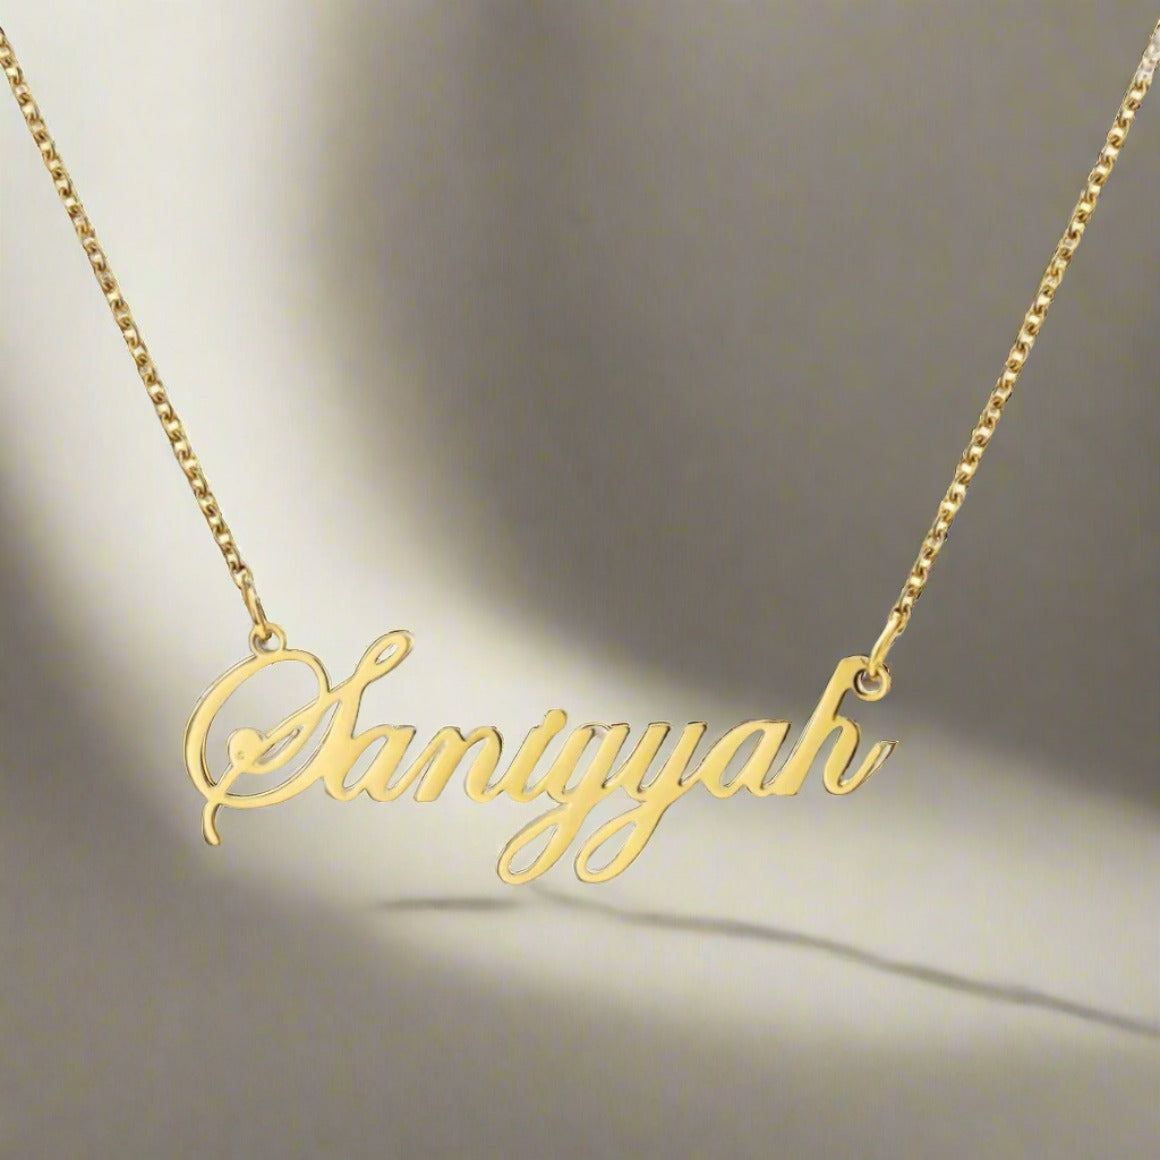 Name Plate Necklace w/ Simple Chain